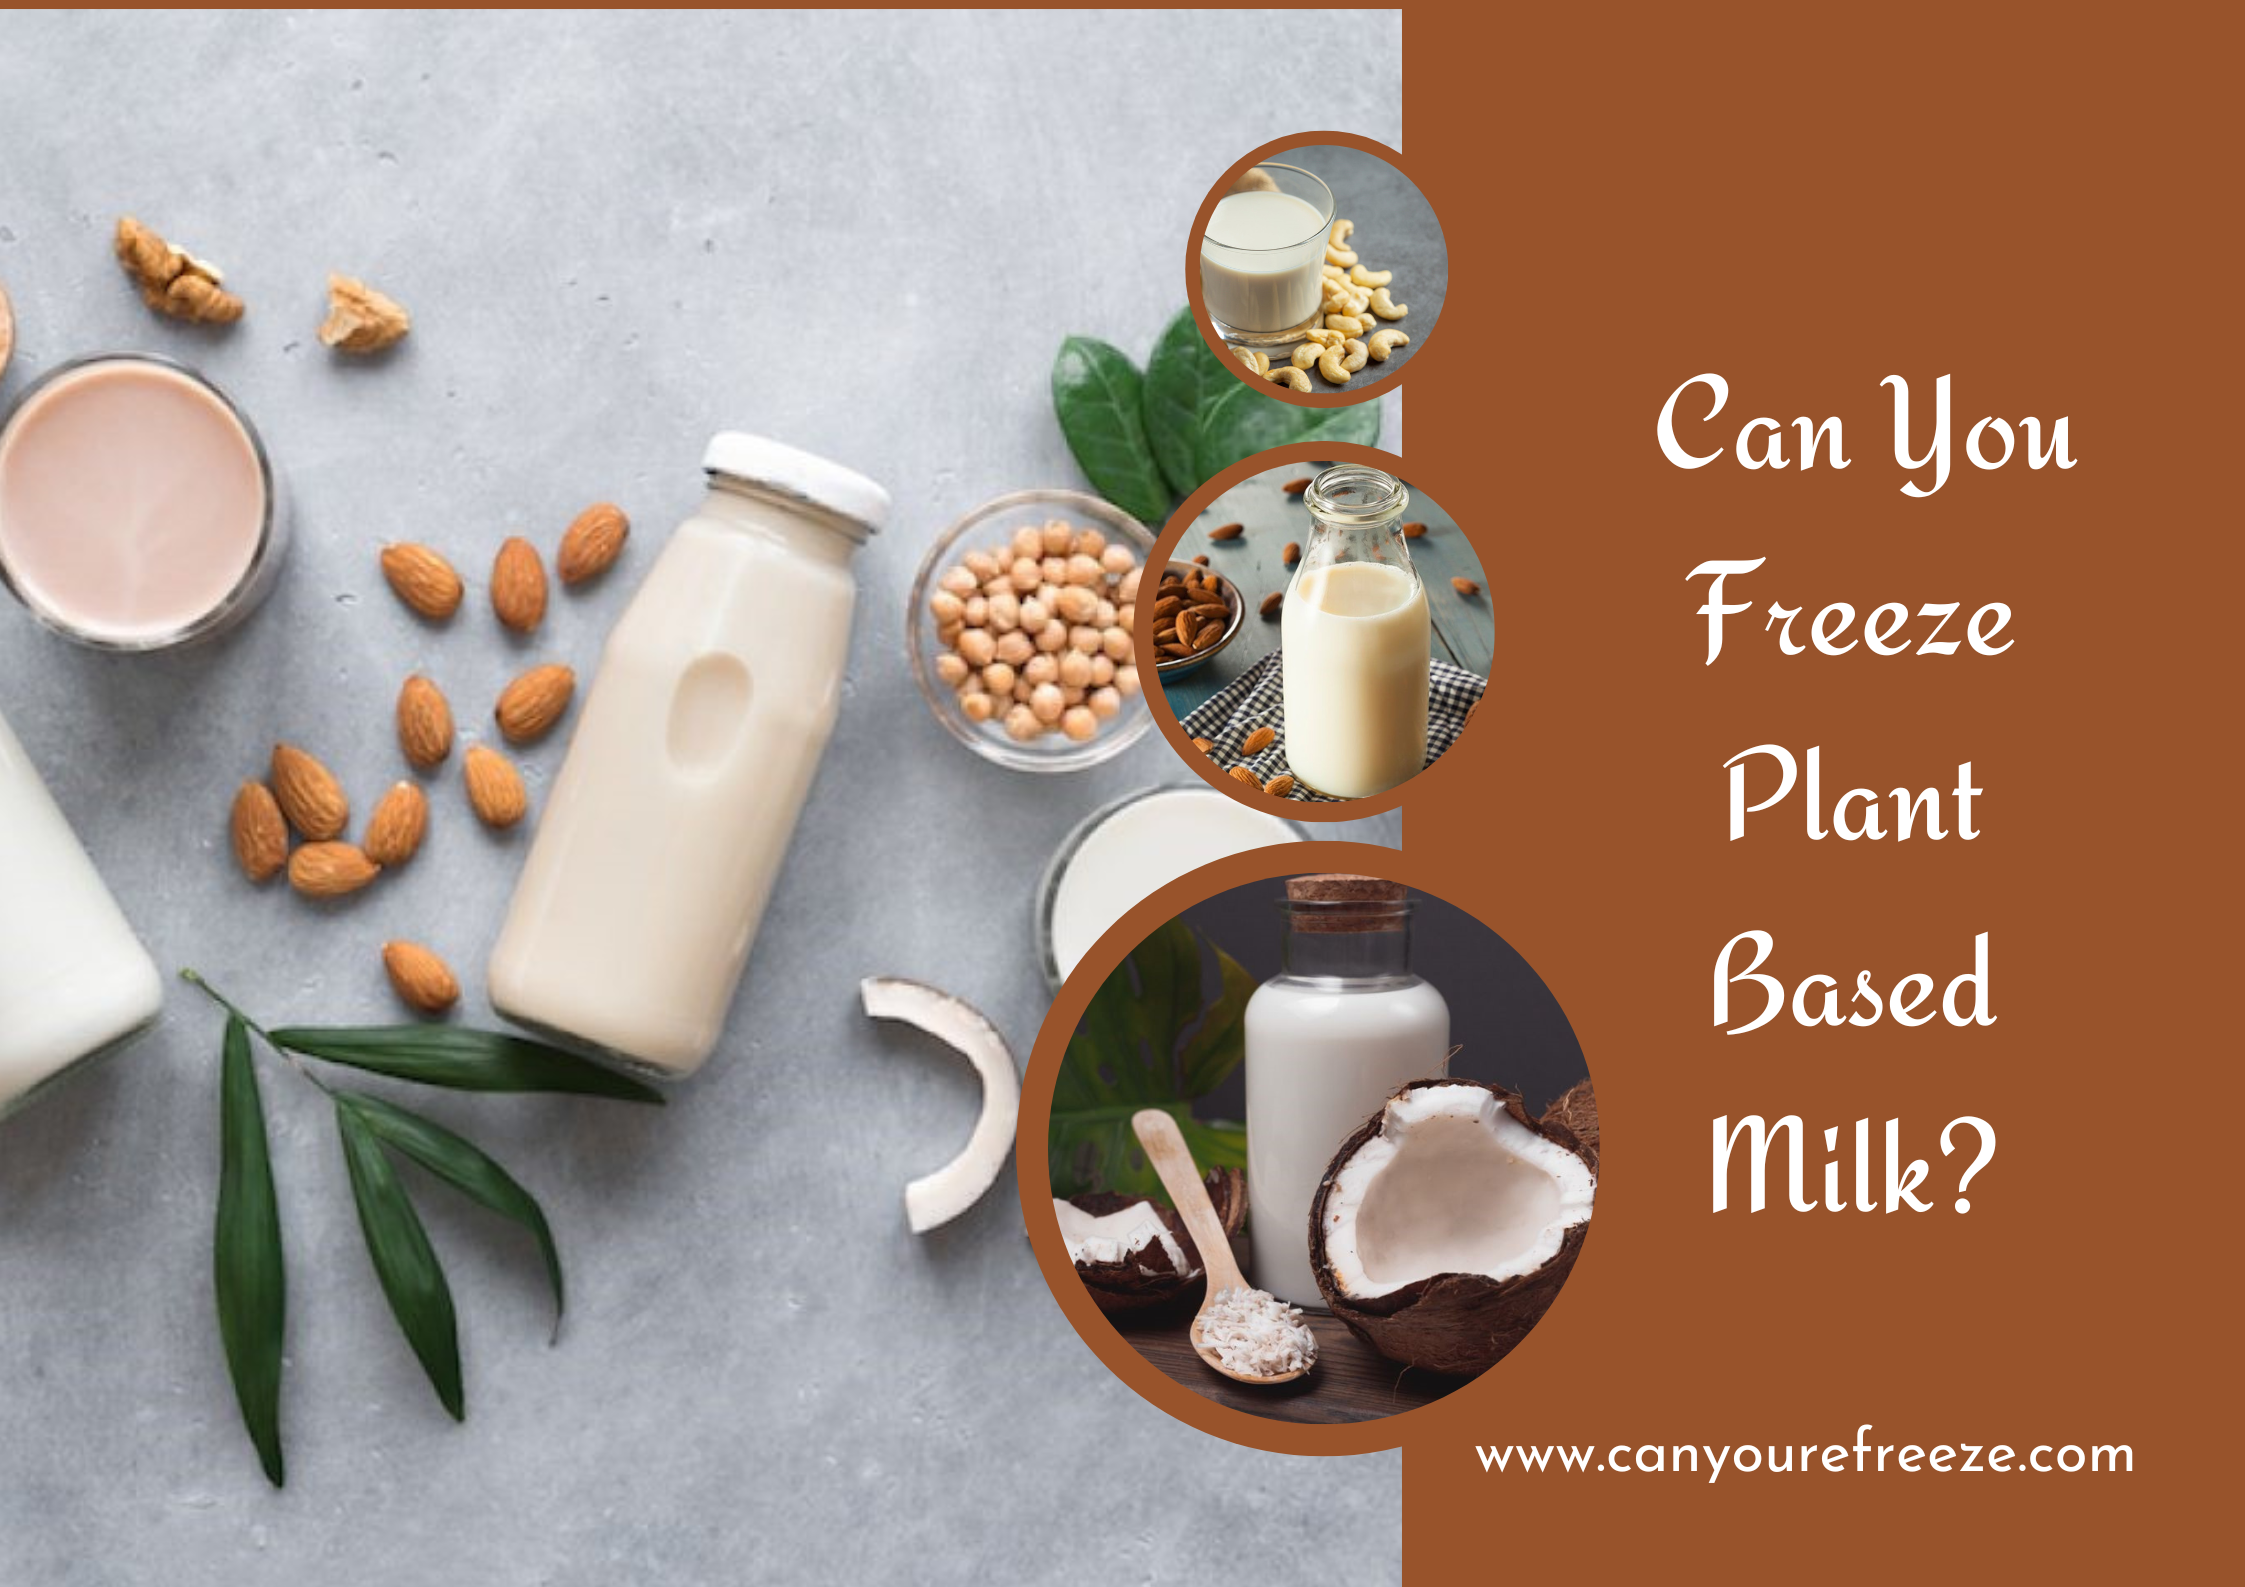 Can You Freeze Plant Based Milk